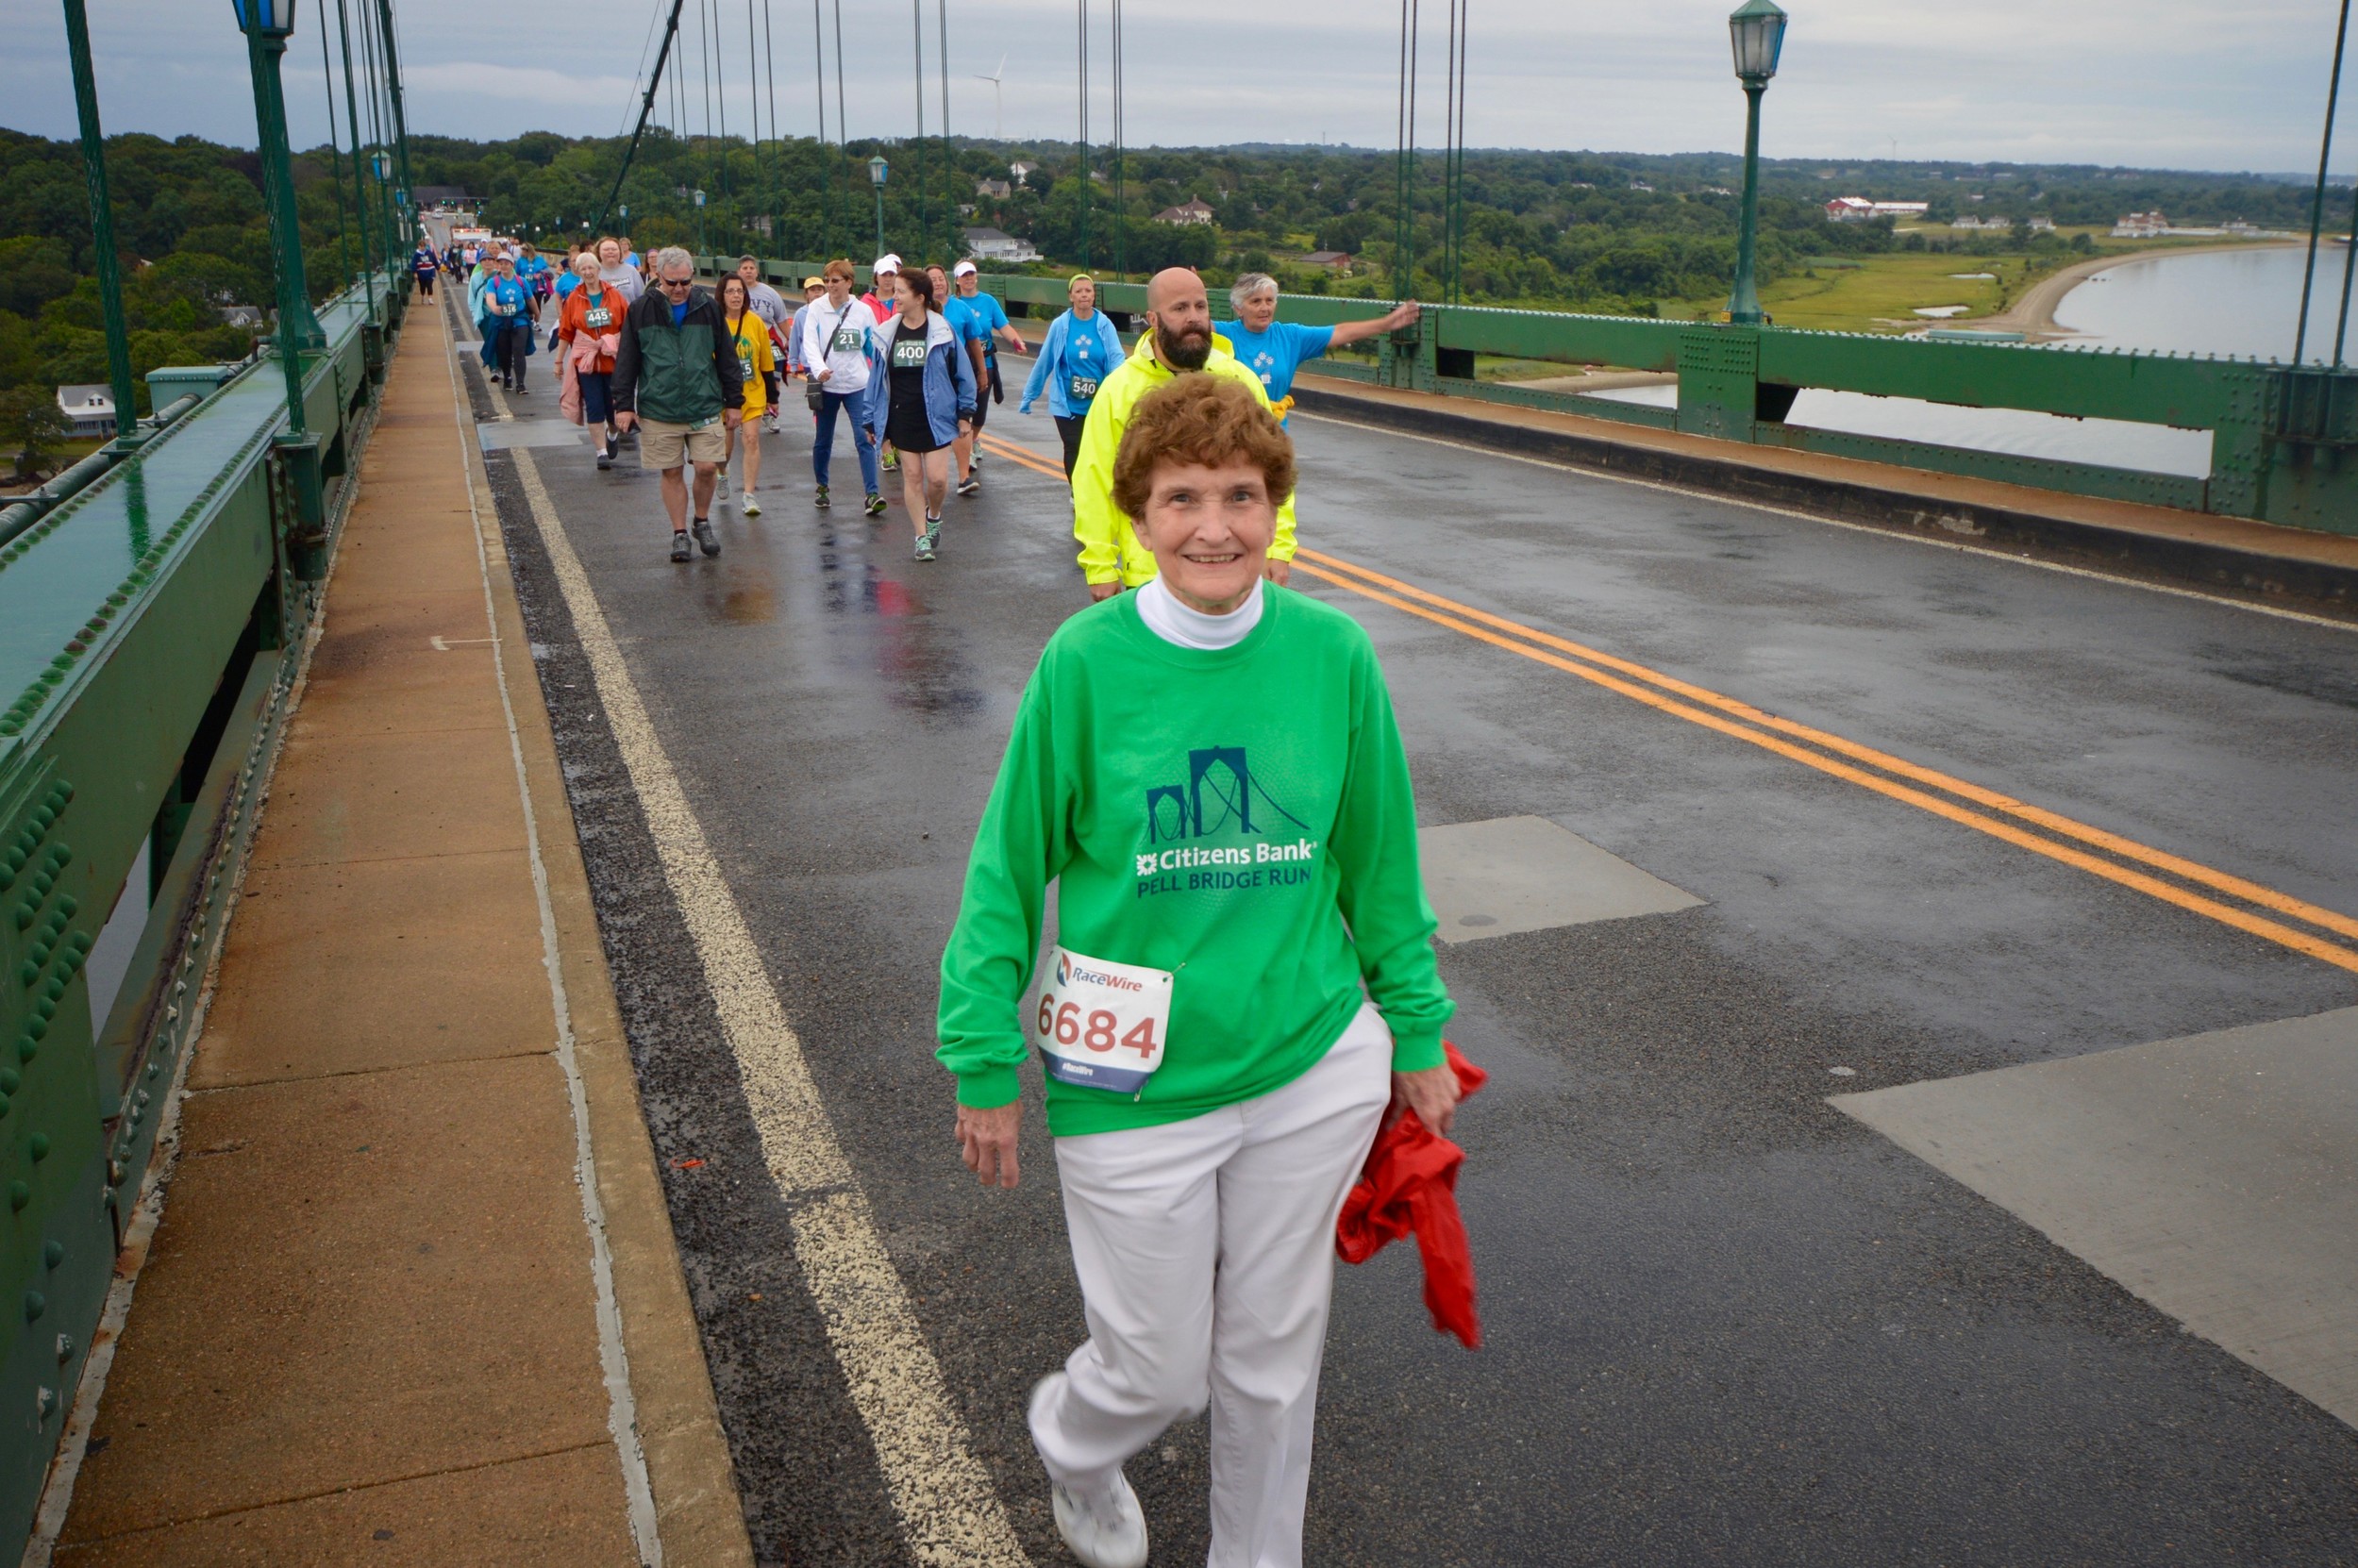 Having just left the Portsmouth School Department after 42 years, Diana White spent her first day of retirement Saturday morning on top of the Mt. Hope Bridge.